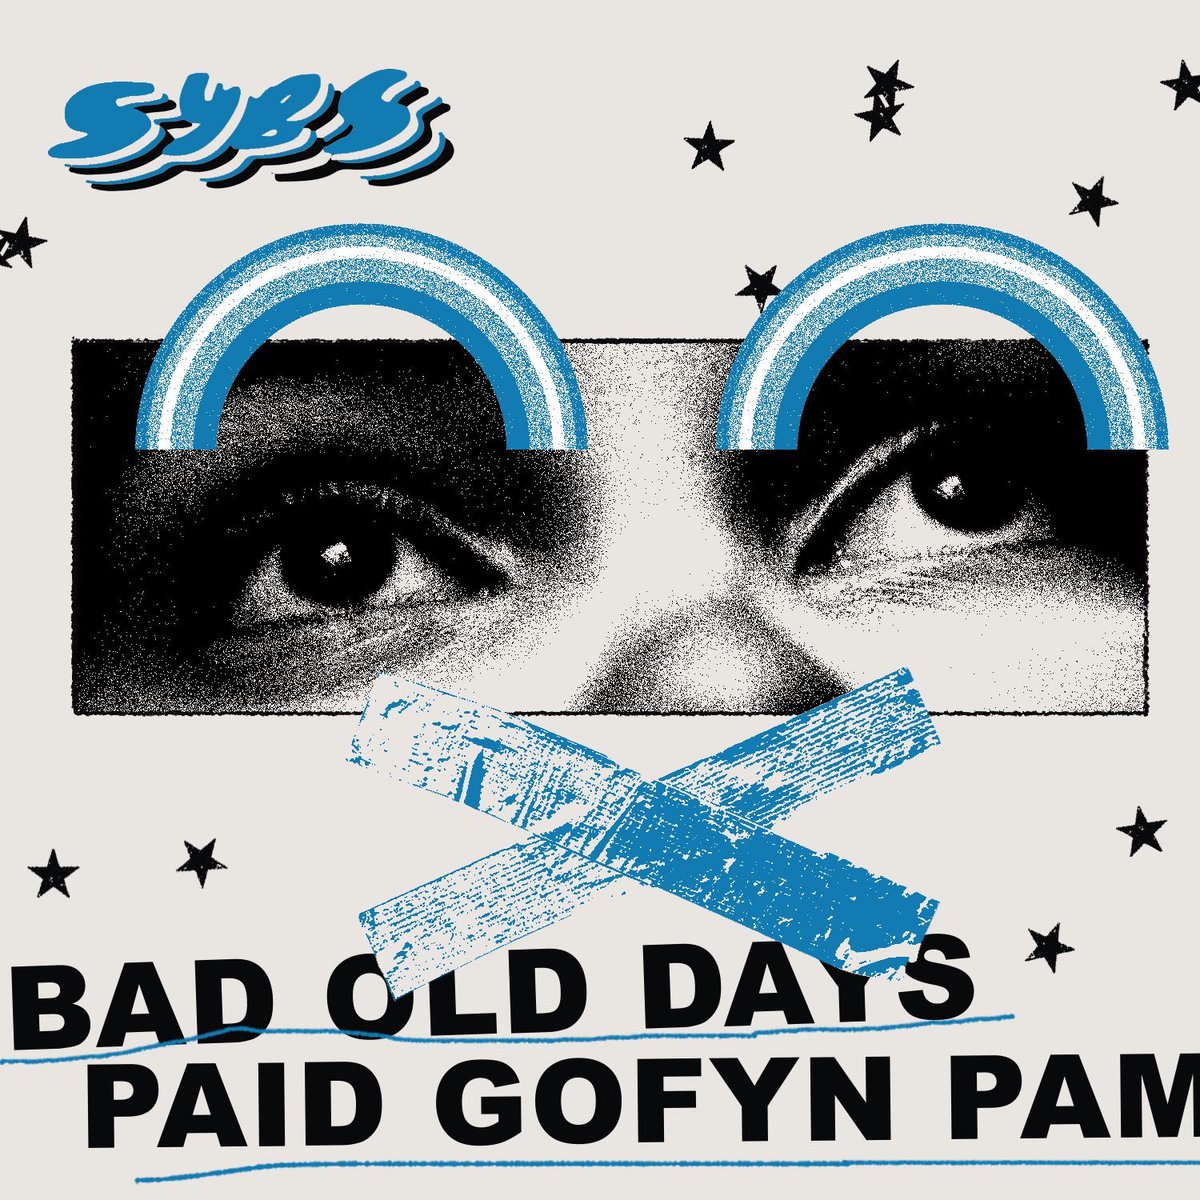 Our double A side Bad Old Days/Paid Gofyn Pam is out today! Bad Old Days is the oldest song on the album, that’s been around since our very first gig!